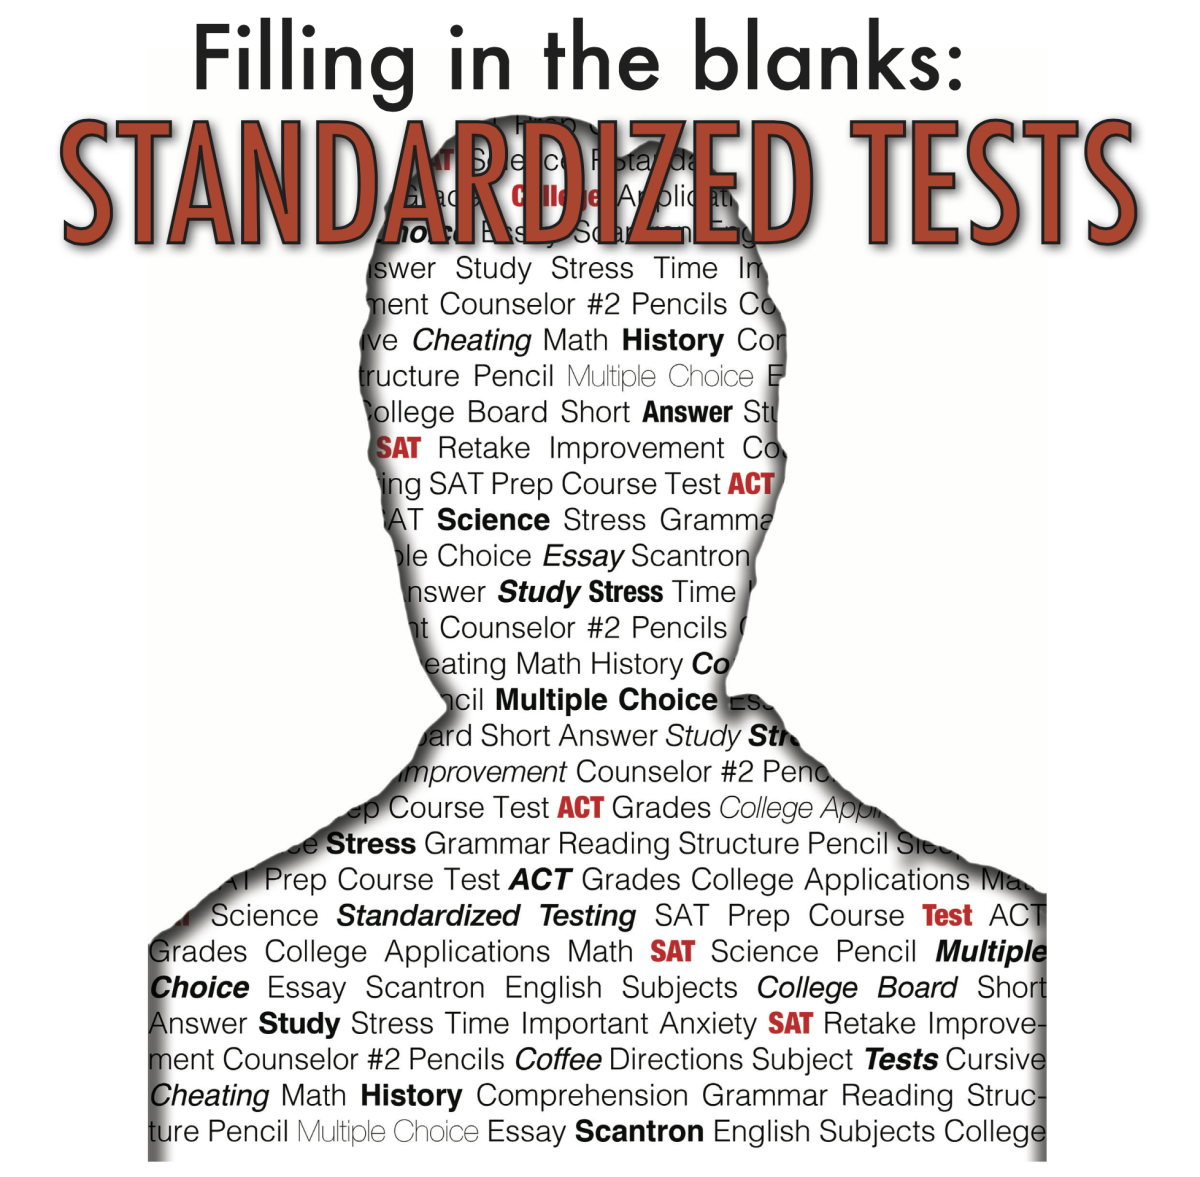 Filling+in+the+blanks%3A+Standardized+Tests